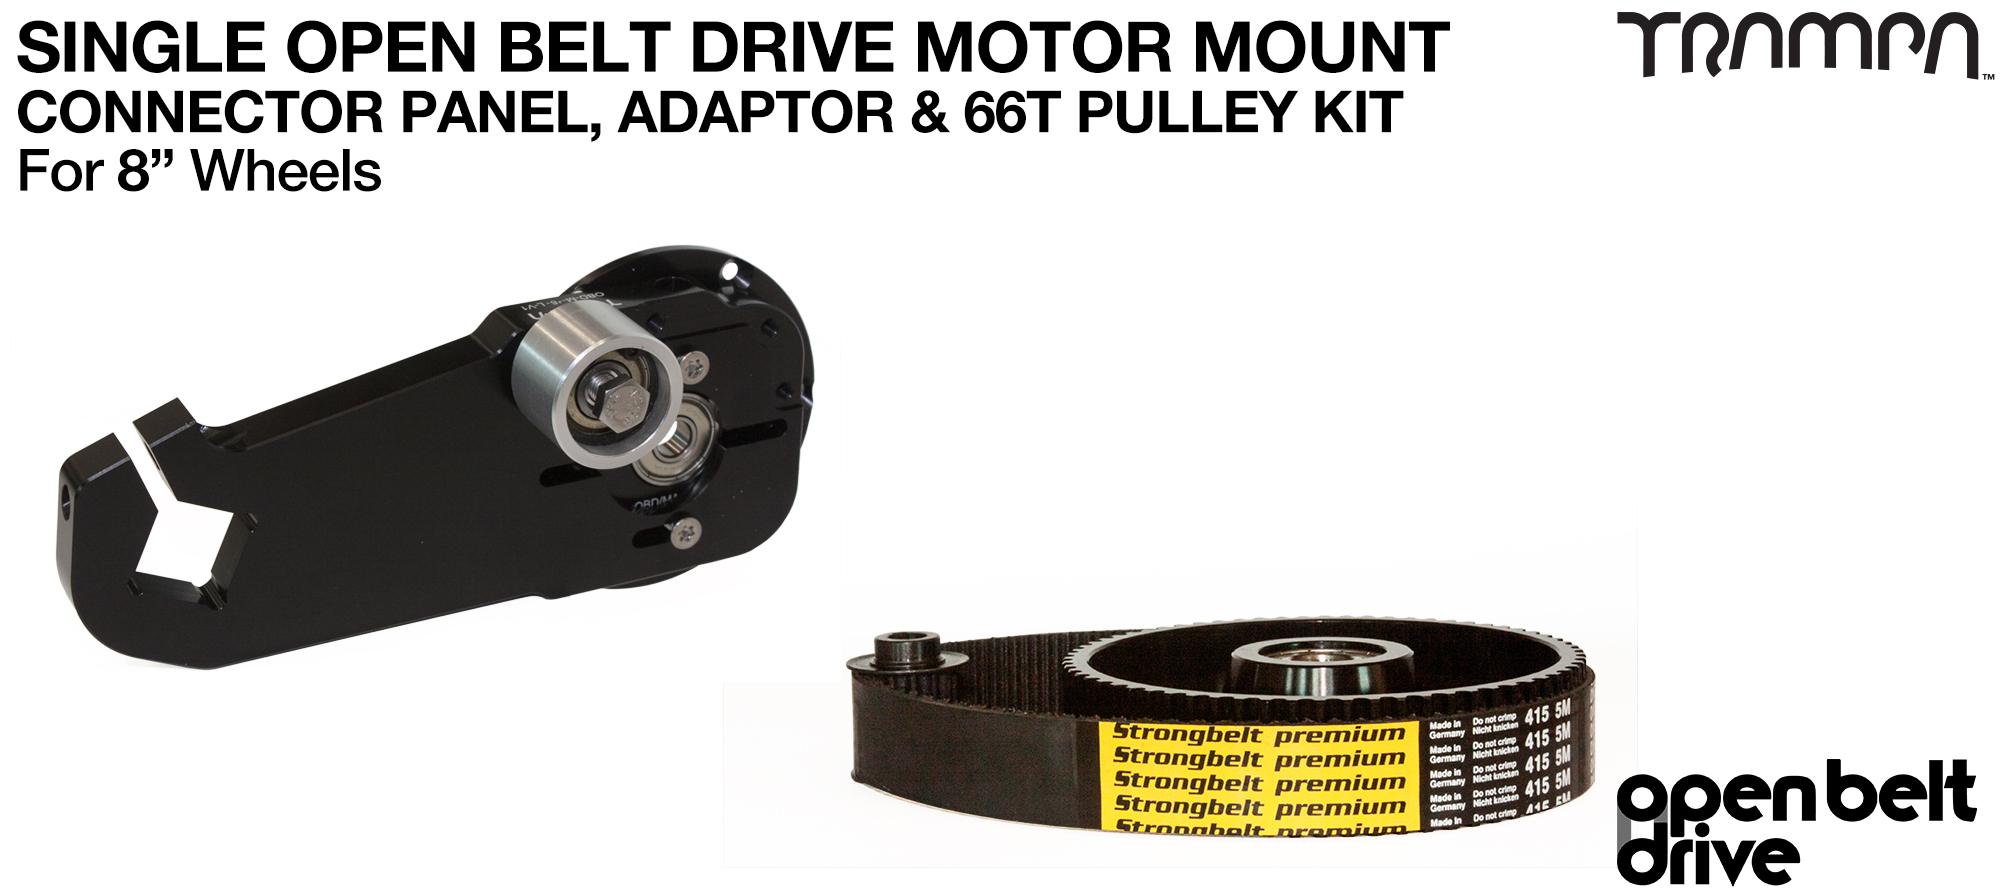 66T OBD Motor Mount & 66 tooth Pulley for 8 Inch Wheel - SINGLE